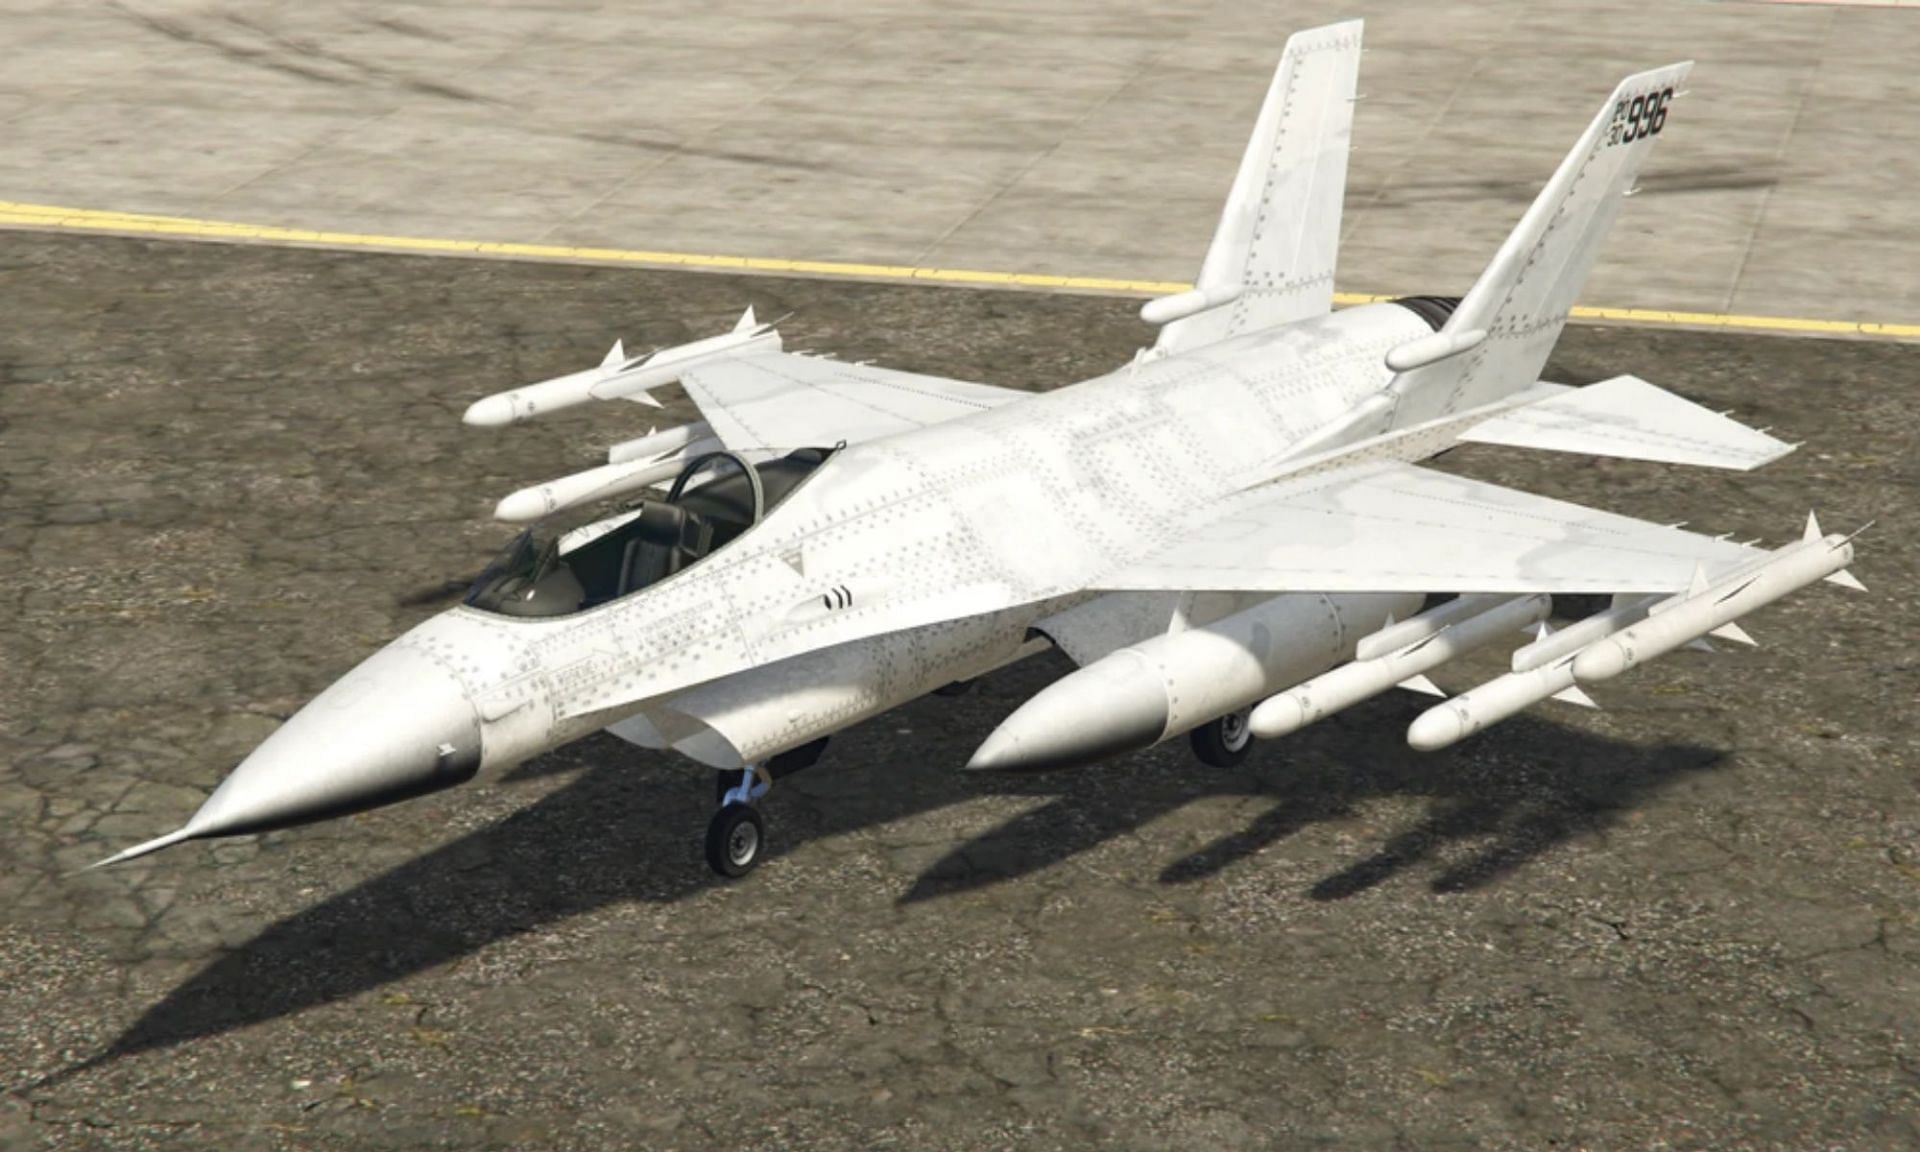 The P-996 LAZER is a very competitive aircraft vehicle